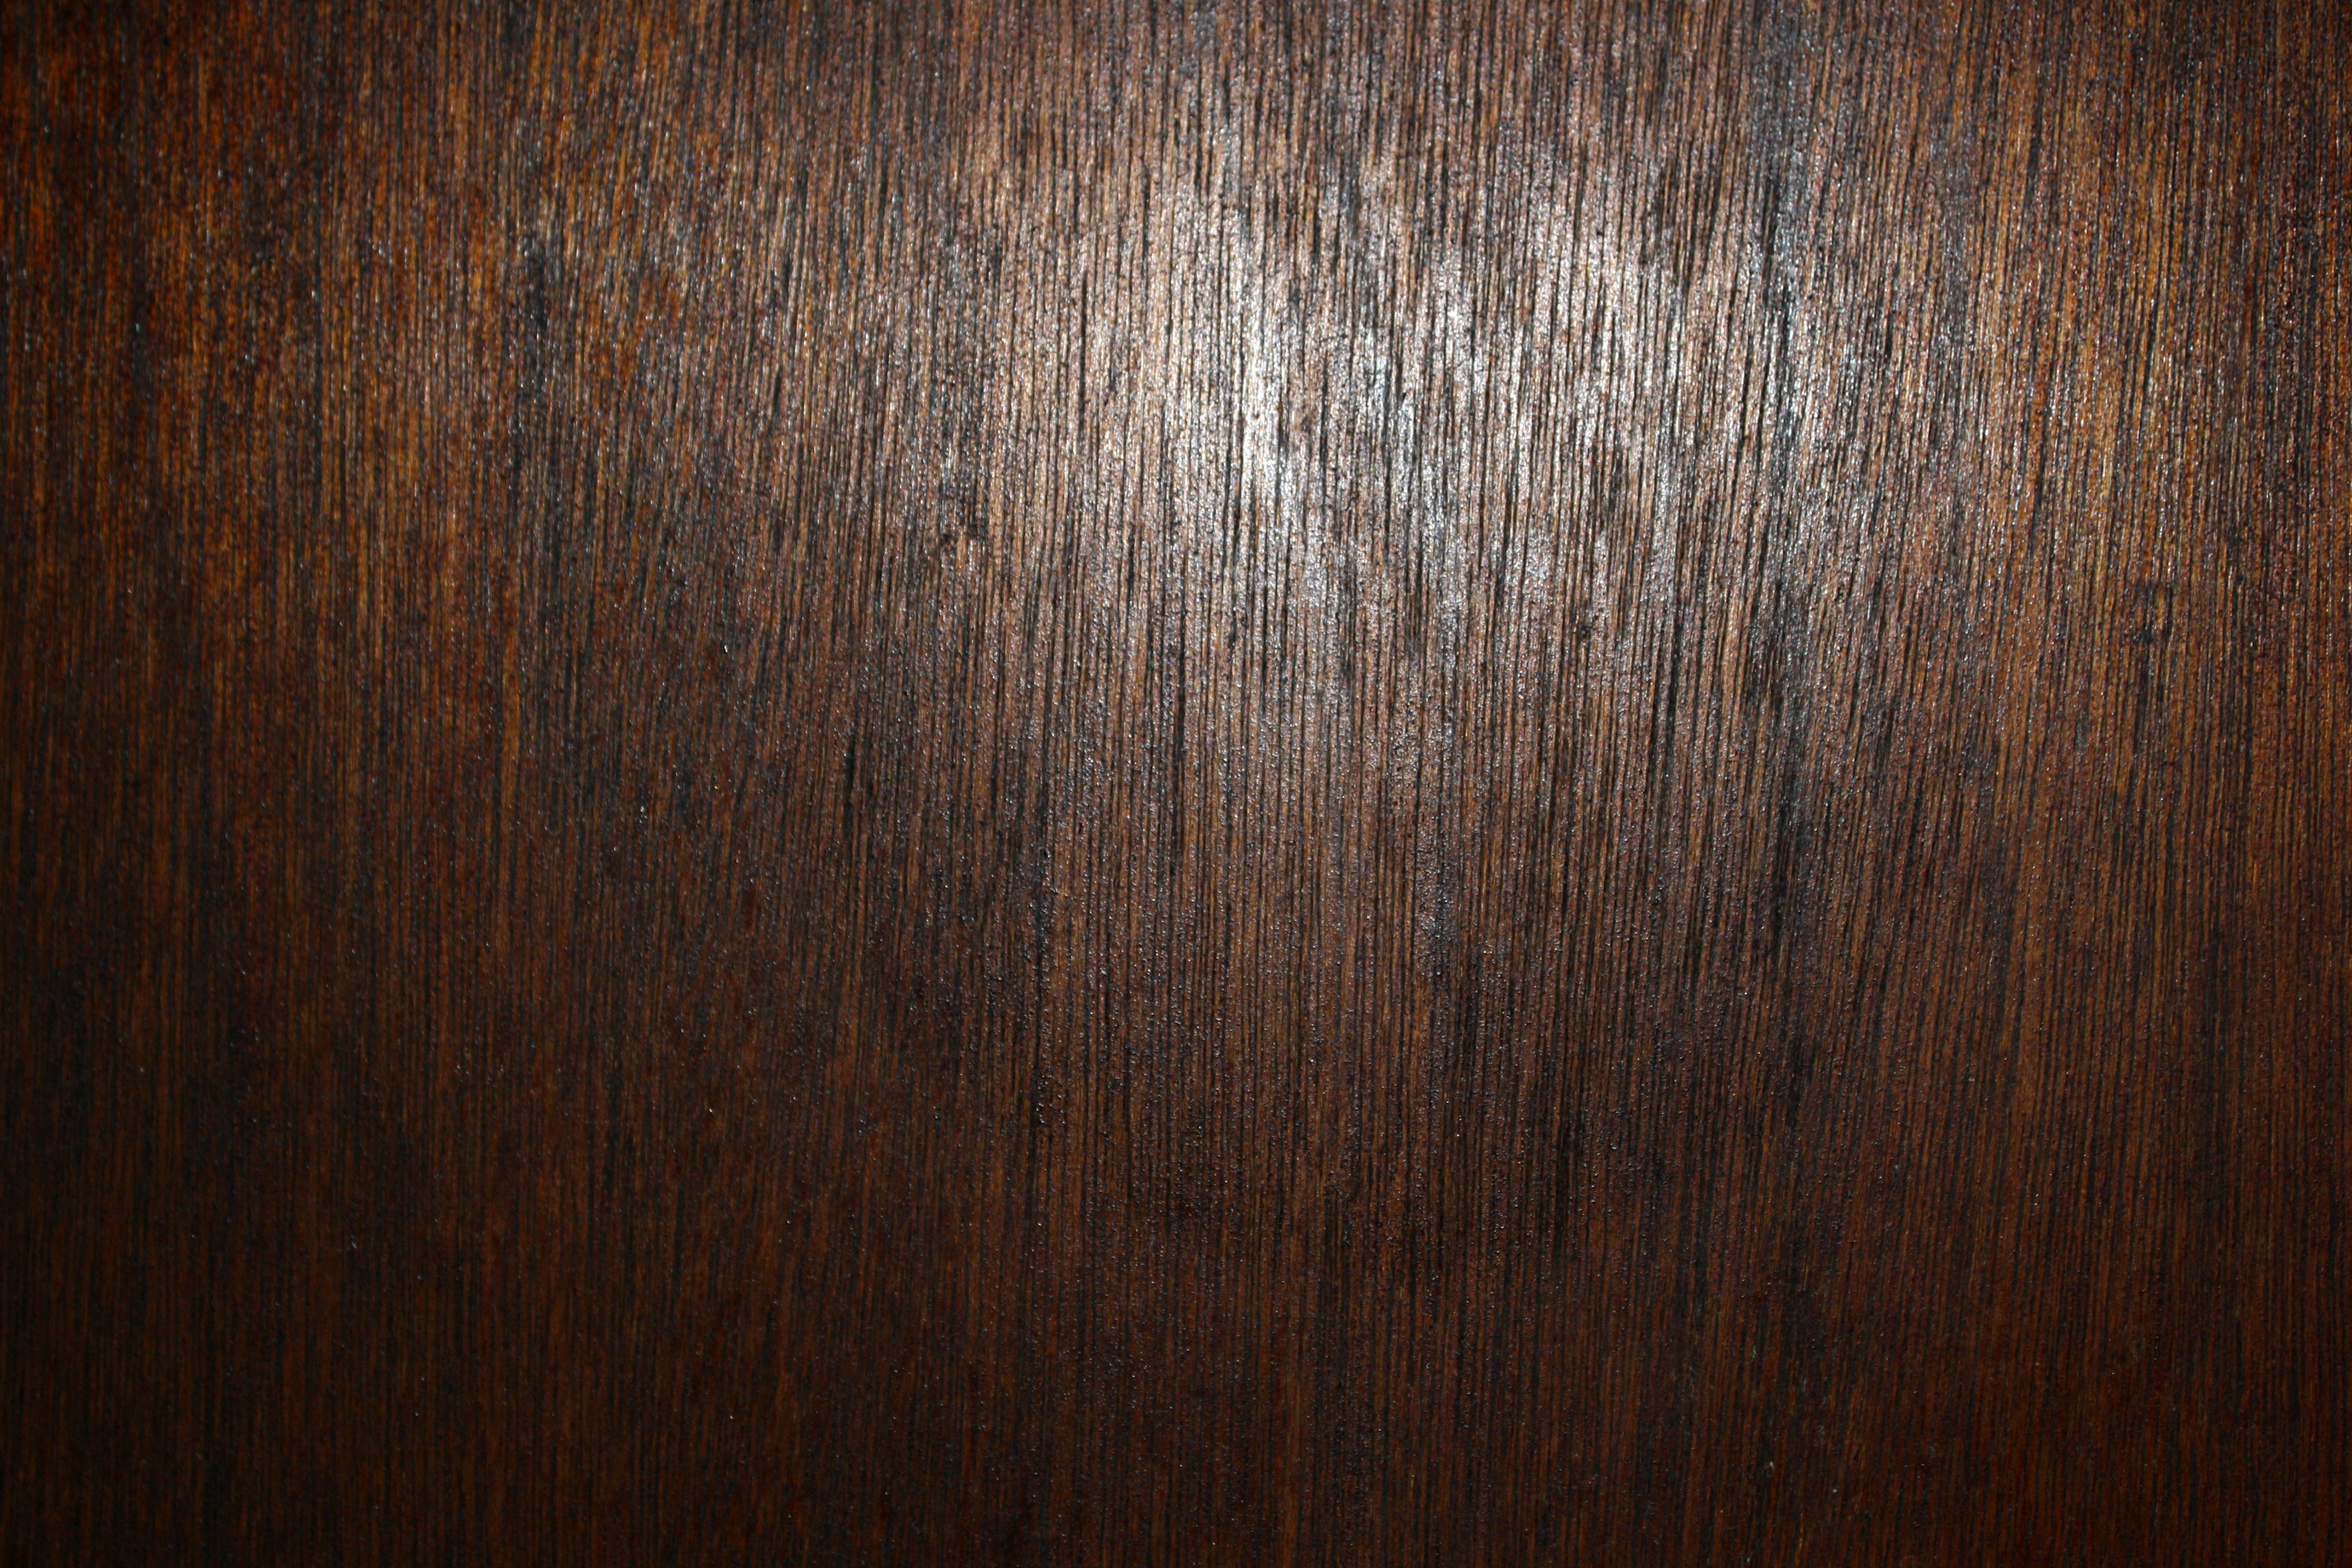 Wood Grain Textured Wallpaper For Red Wood